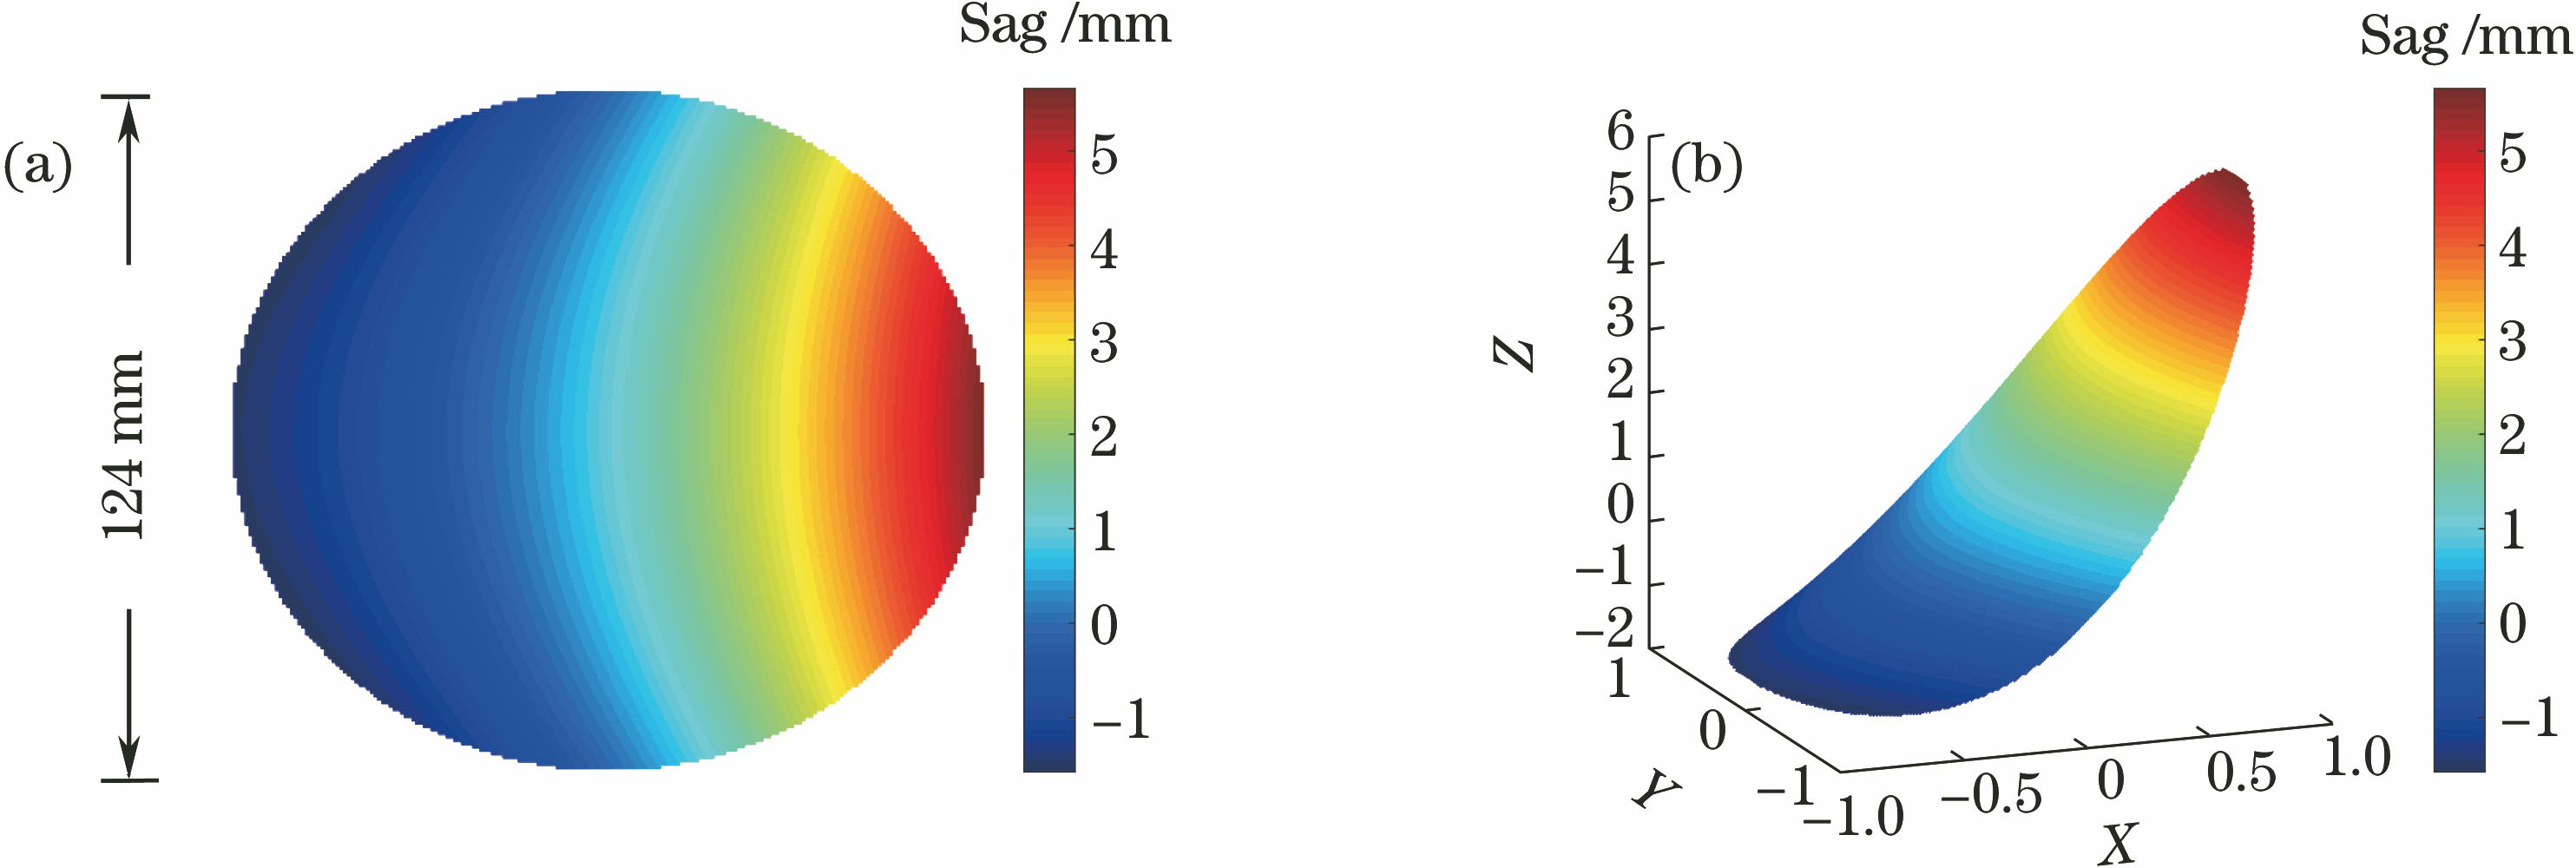 Profile of Zernike freeform surface of primary mirror. (a) Two-dimensional; (b) three-dimensional